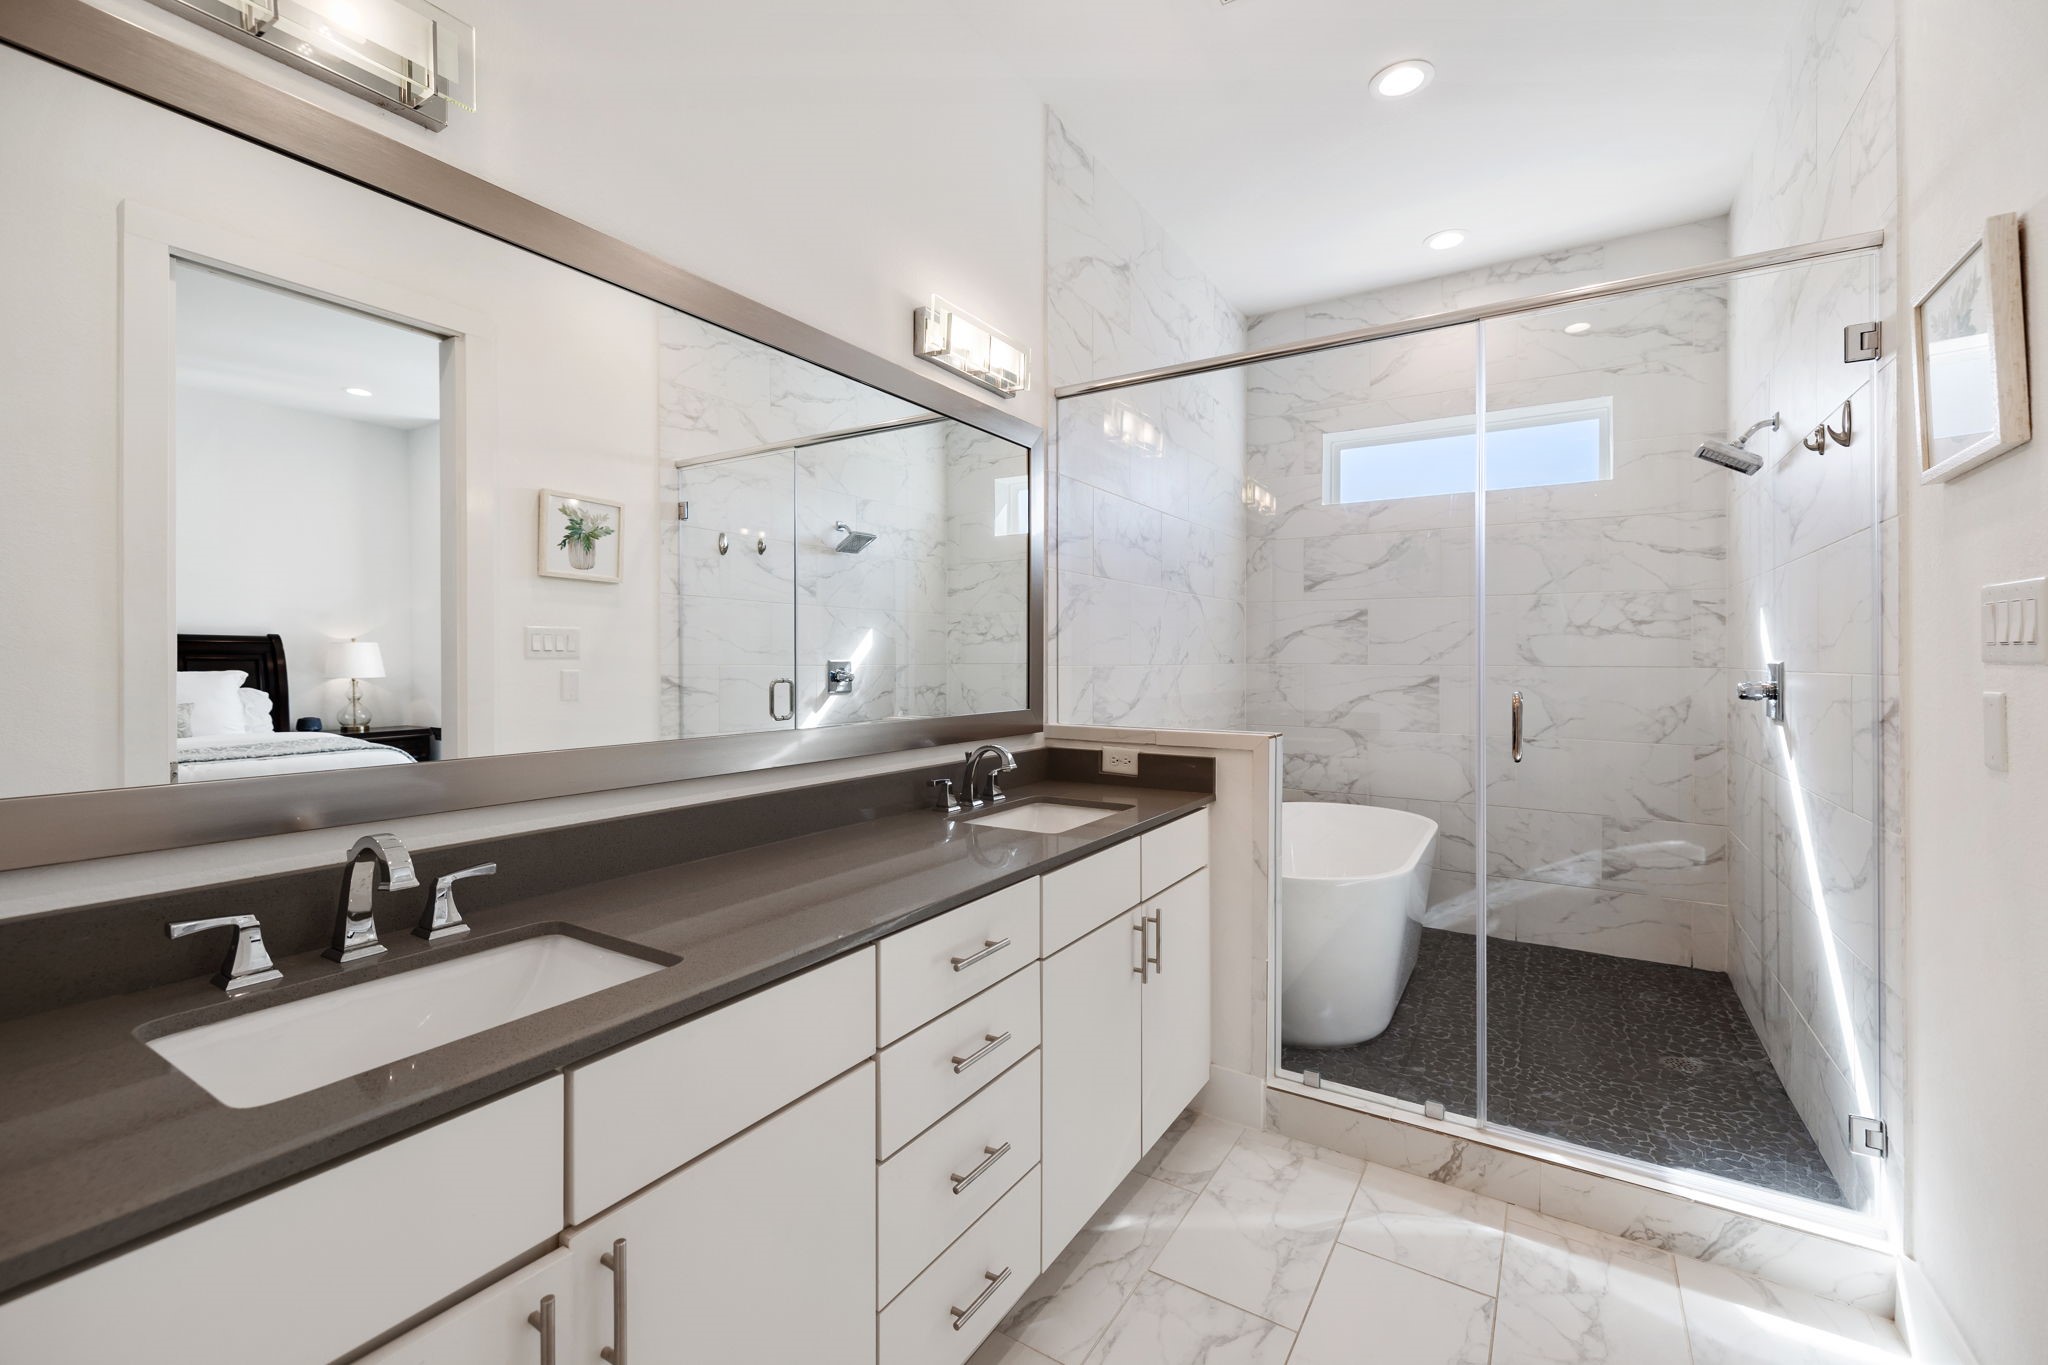 Double sinks, soaking tub and oversized shower- what more could you ask for??